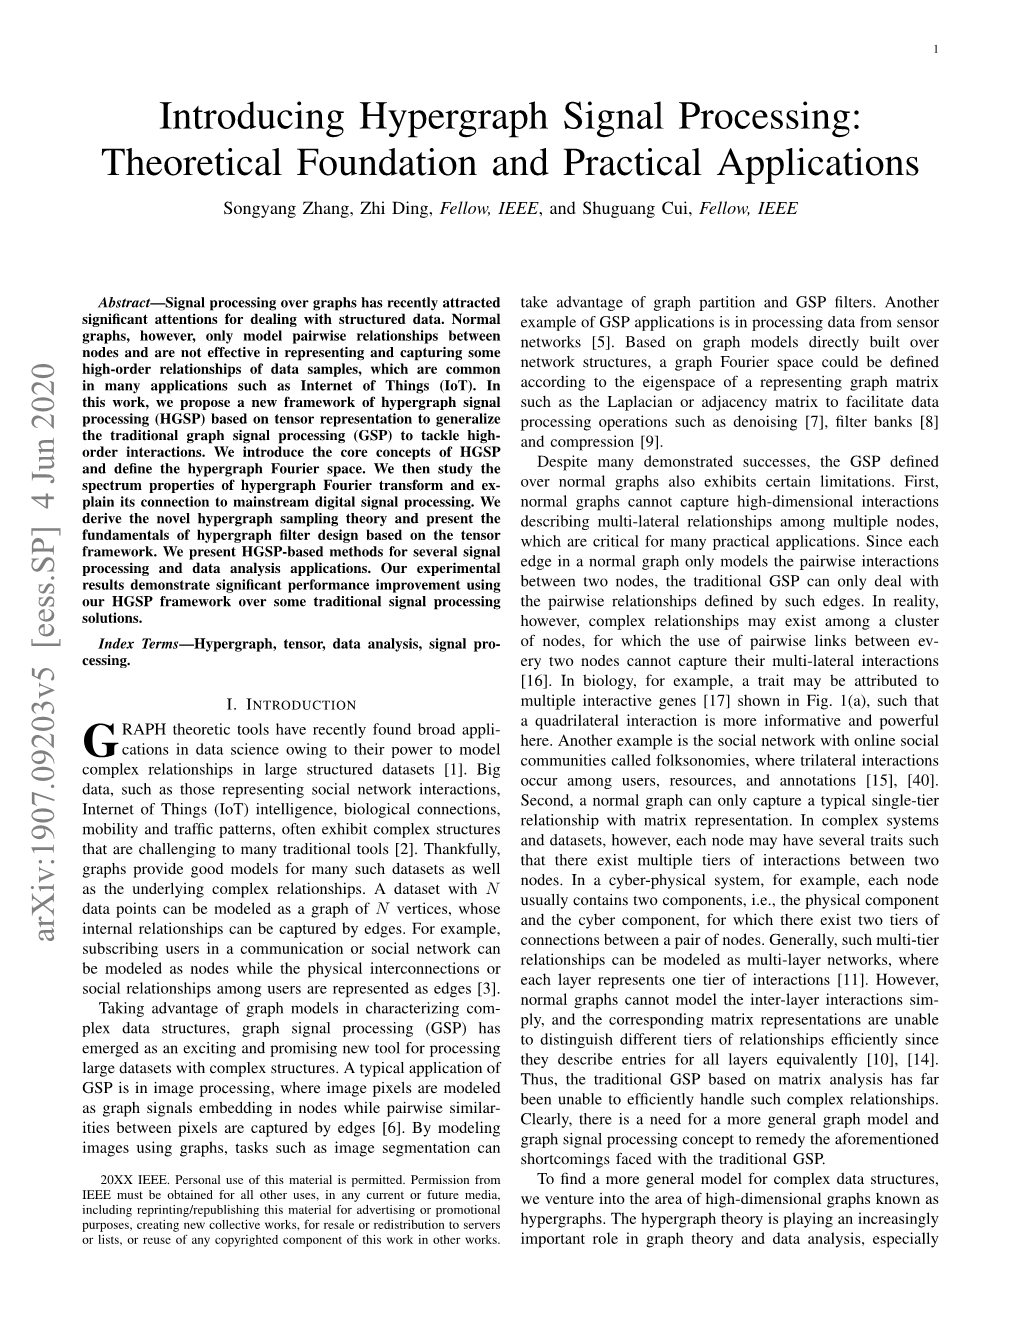 Introducing Hypergraph Signal Processing: Theoretical Foundation and Practical Applications Songyang Zhang, Zhi Ding, Fellow, IEEE, and Shuguang Cui, Fellow, IEEE